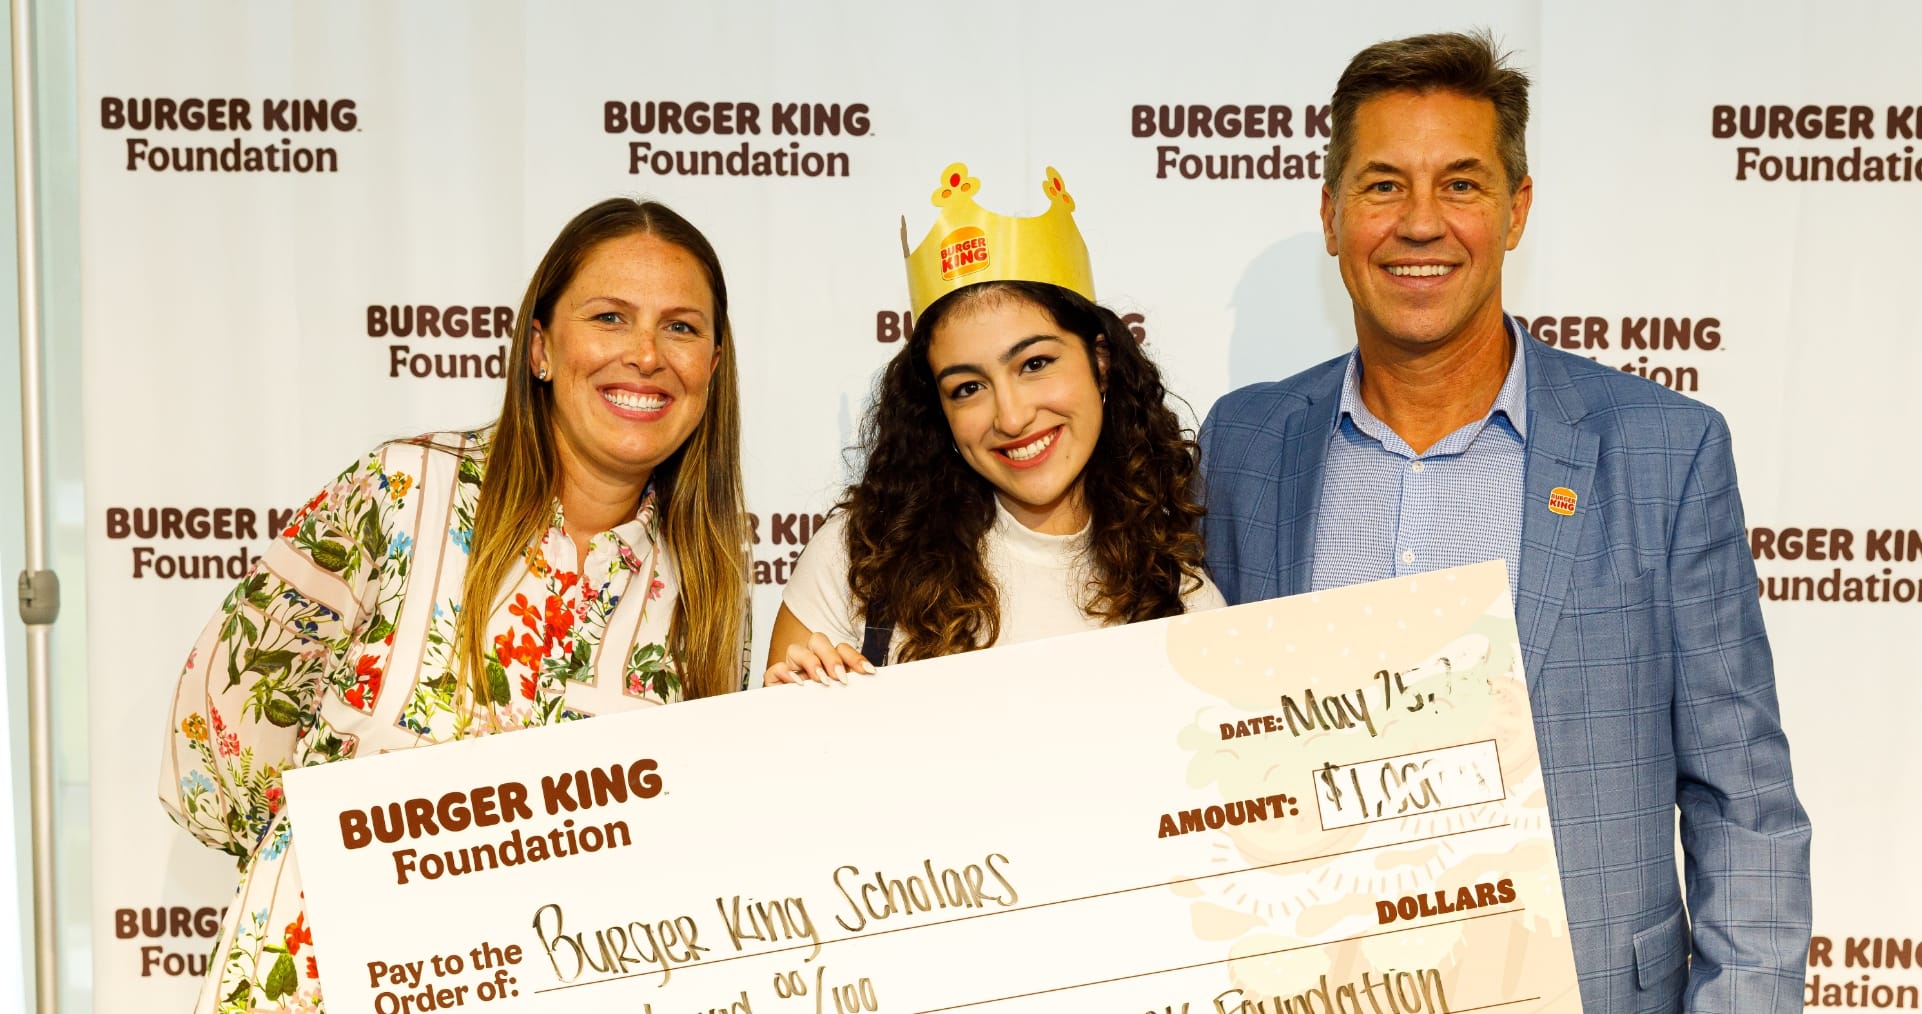 The Burger King Foundation